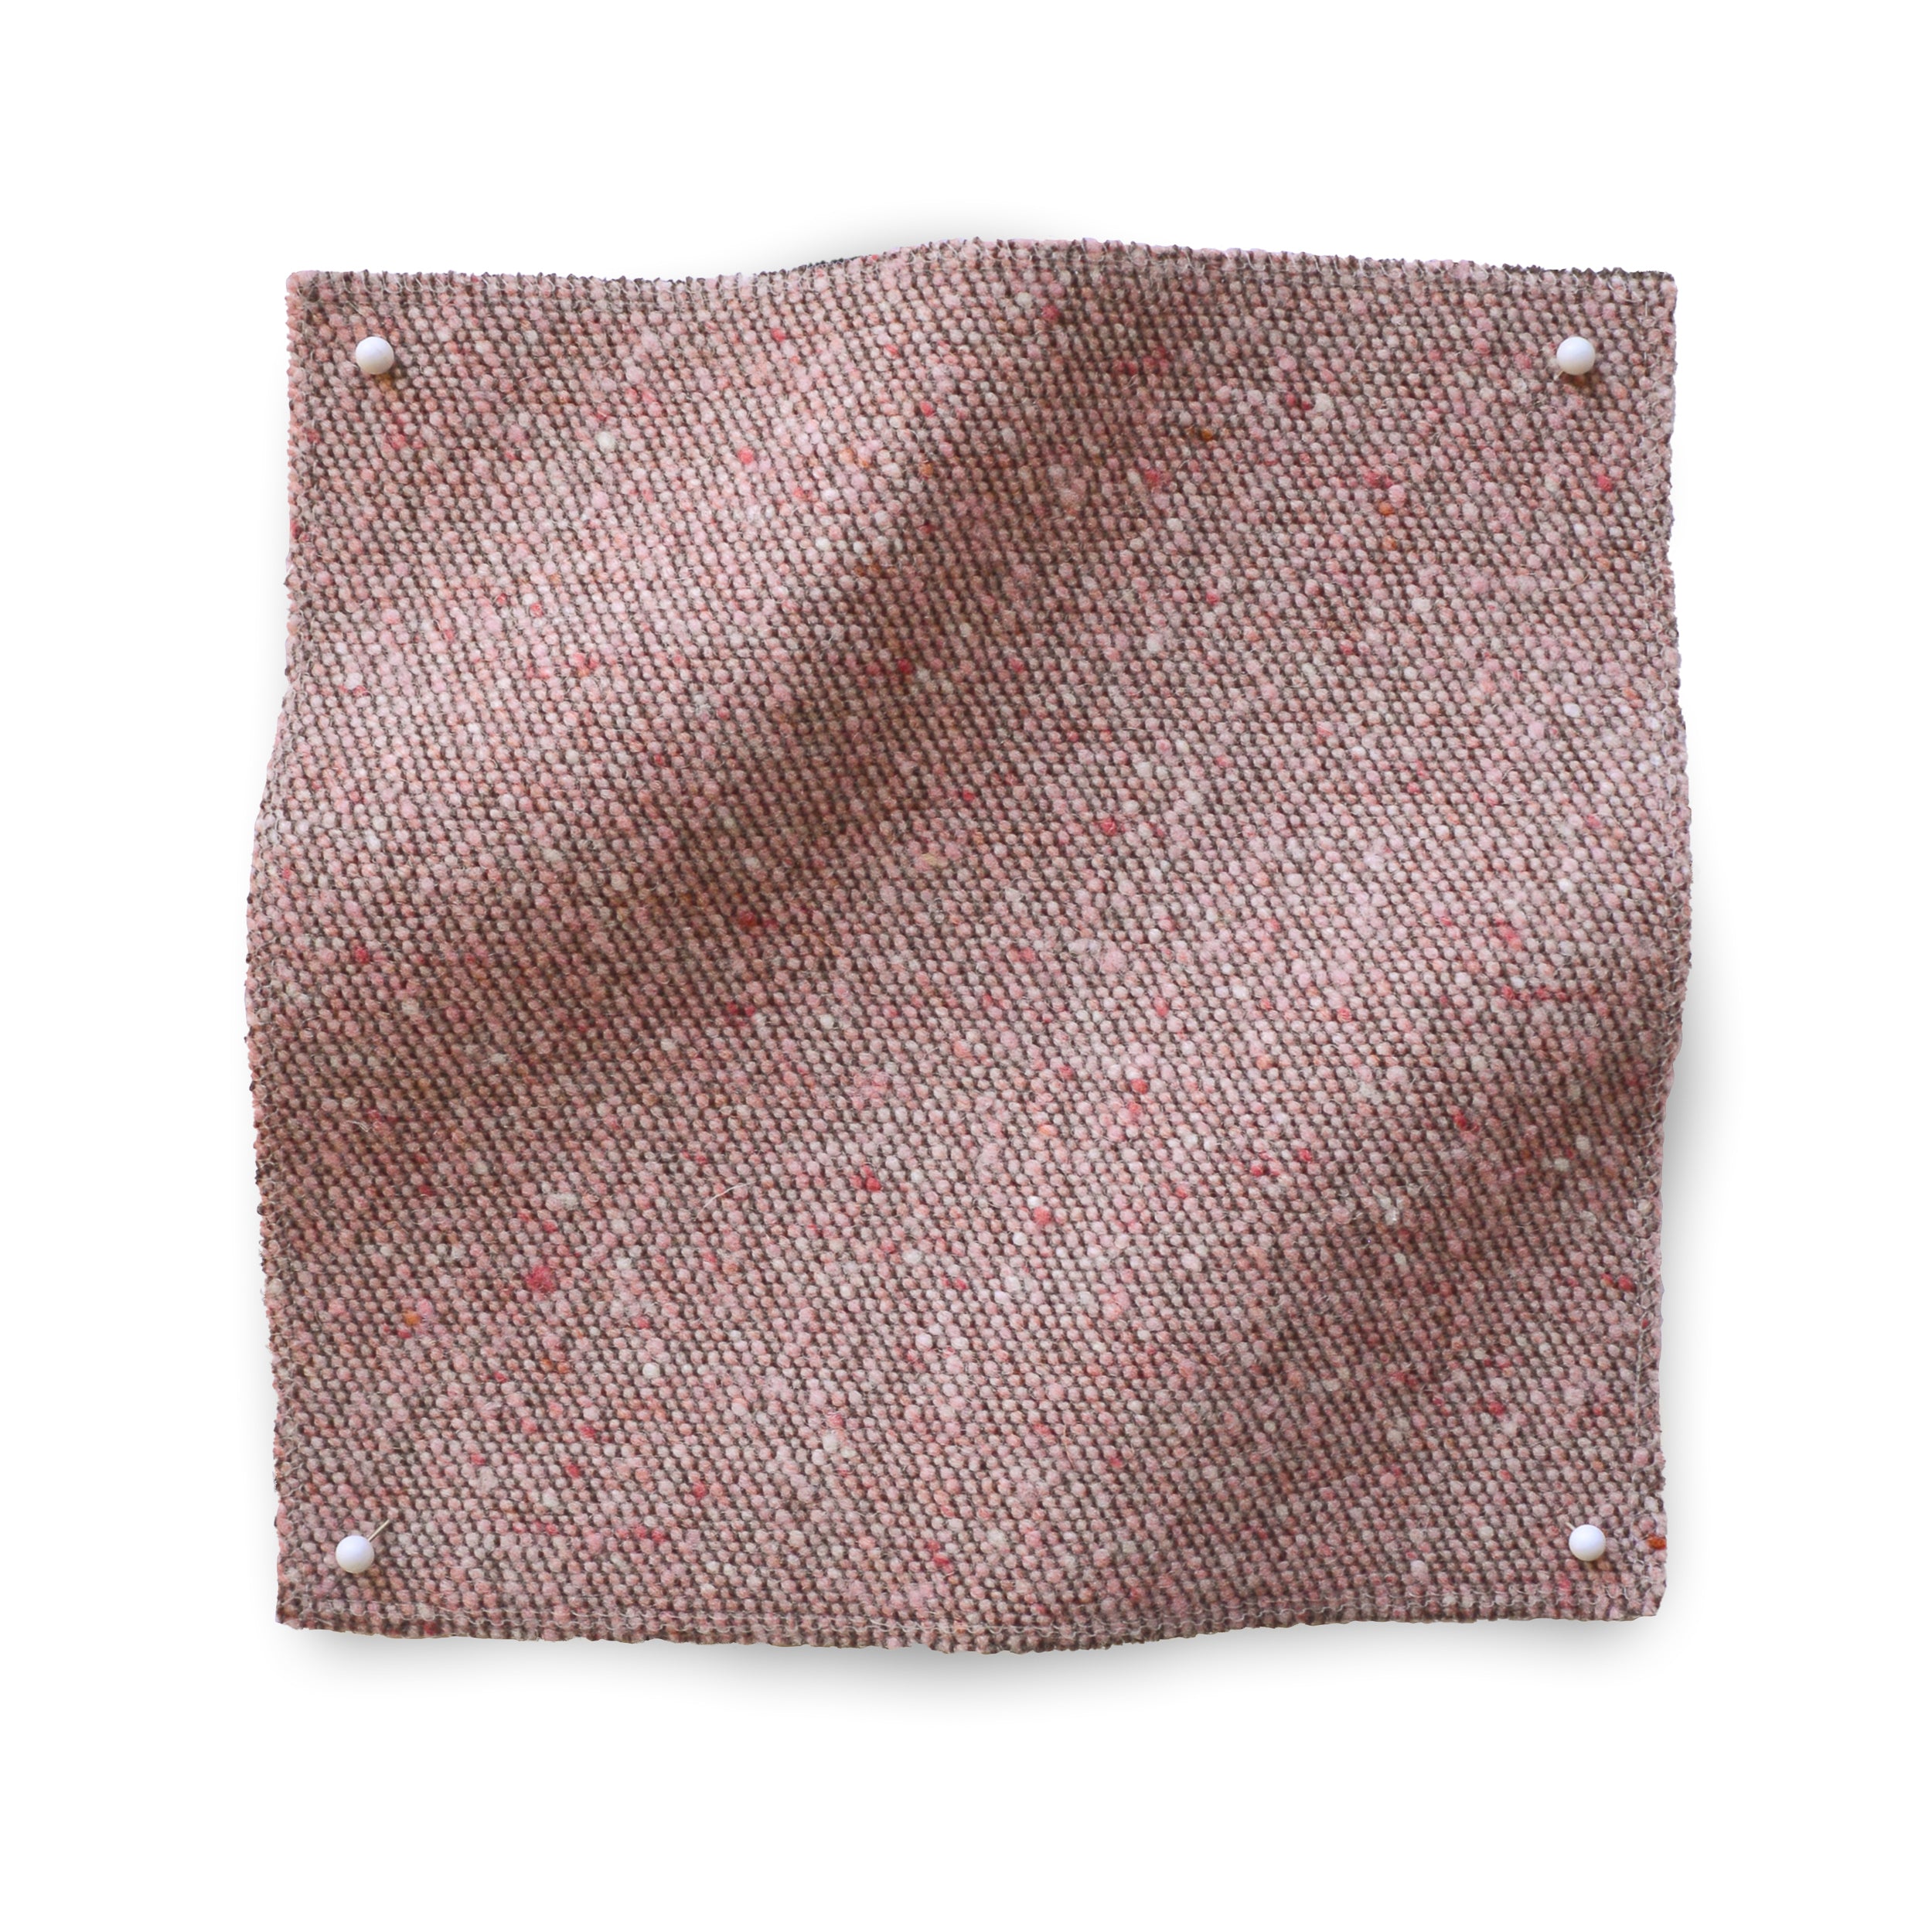 Square fabric swatch of heathered wool in a dusty rose colorway.